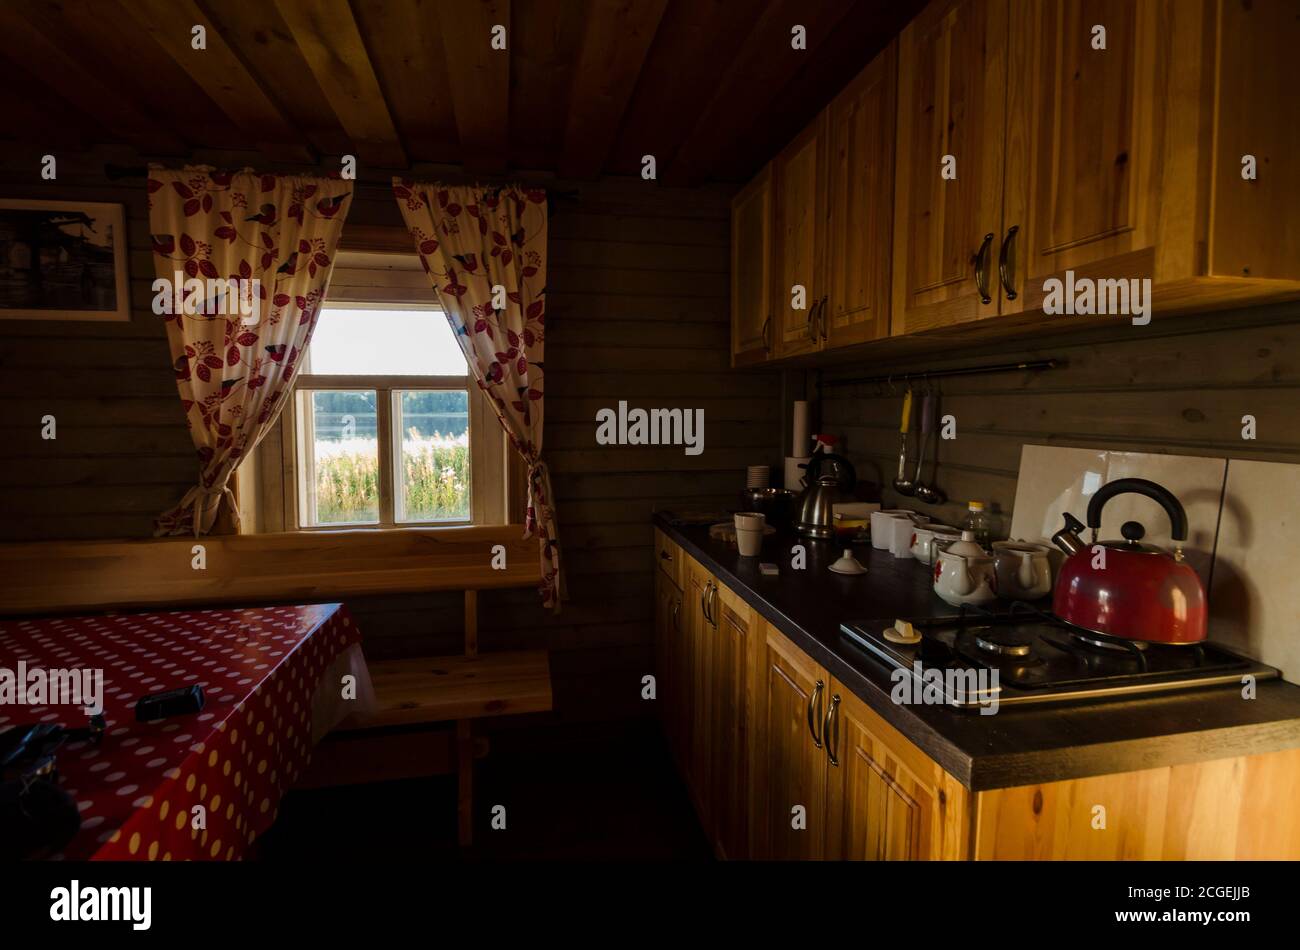 August, 2020 - Porzhensky churchyard. Kitchen in a Russian country house. Russia, Arkhangelsk region Stock Photo